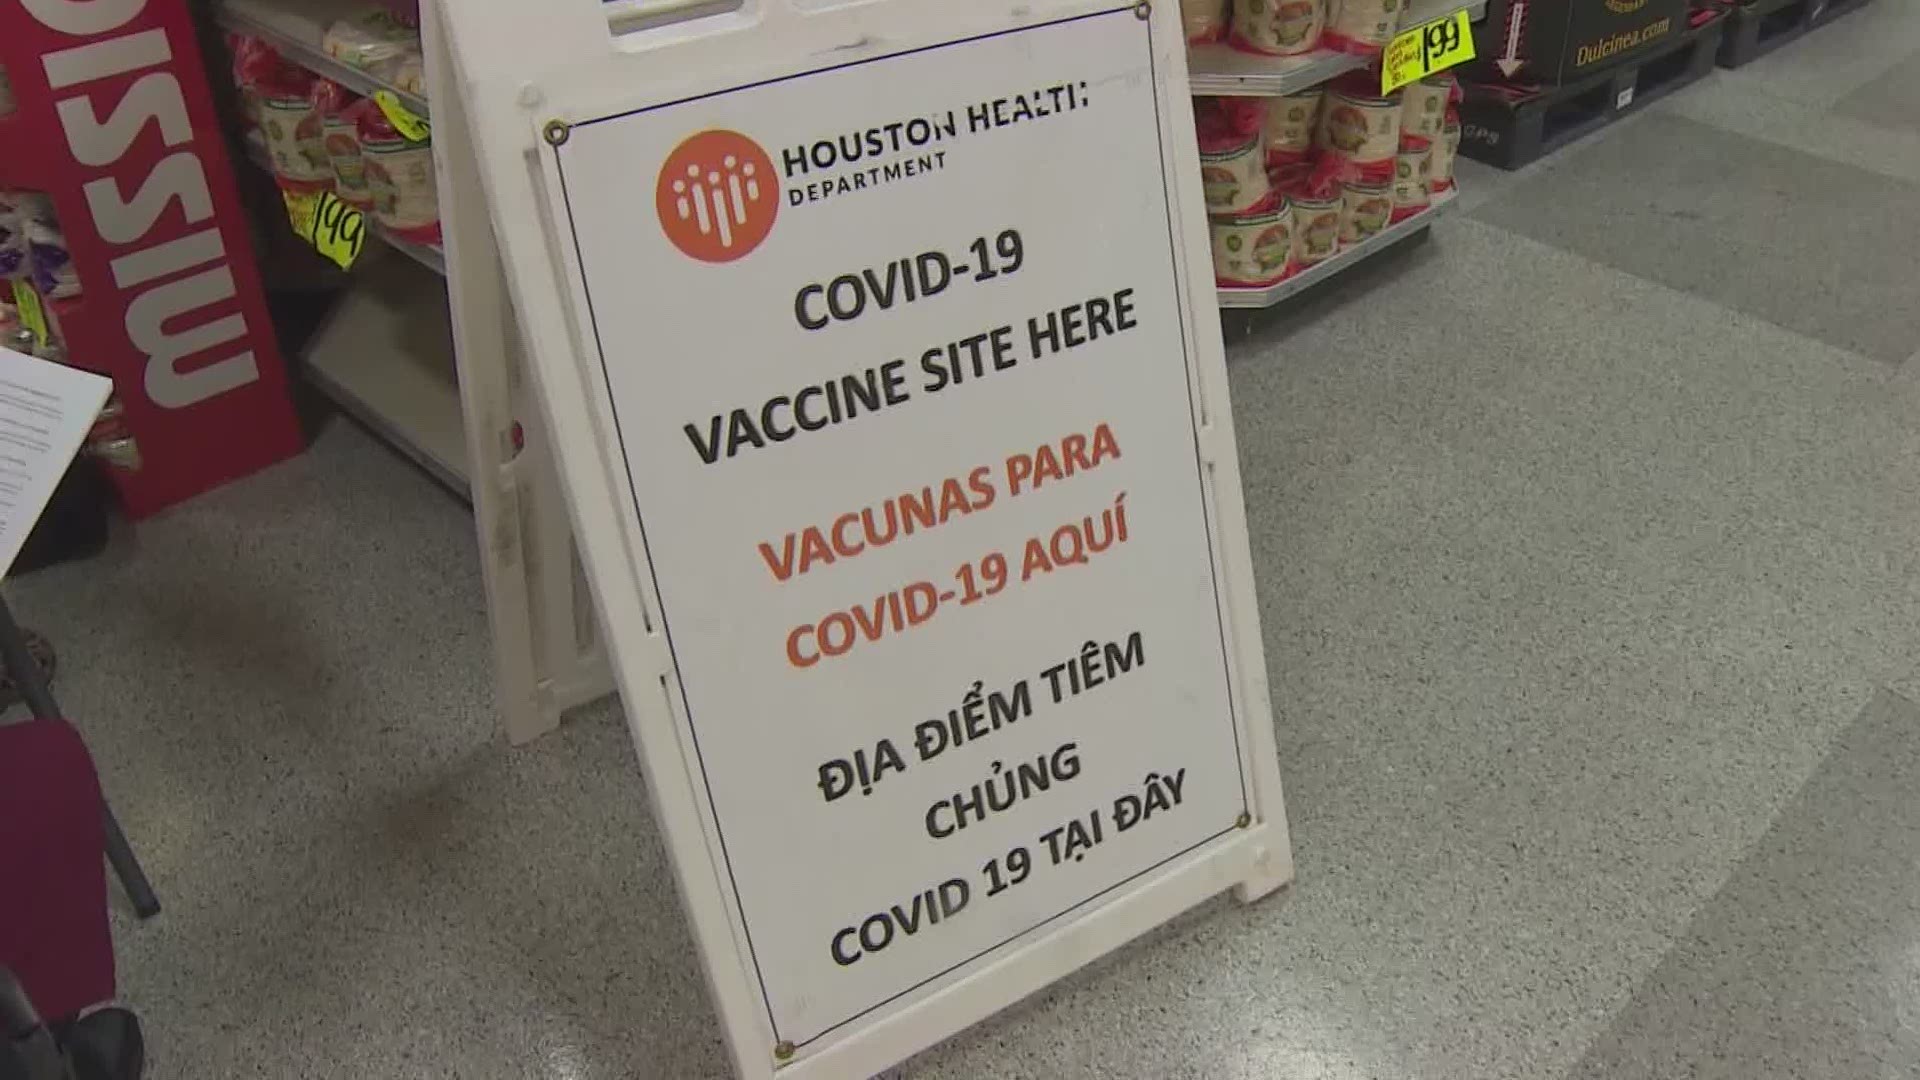 Efforts to get people the COVID-19 vaccine in the city of Houston have not slowed down since it became widely available earlier this year.